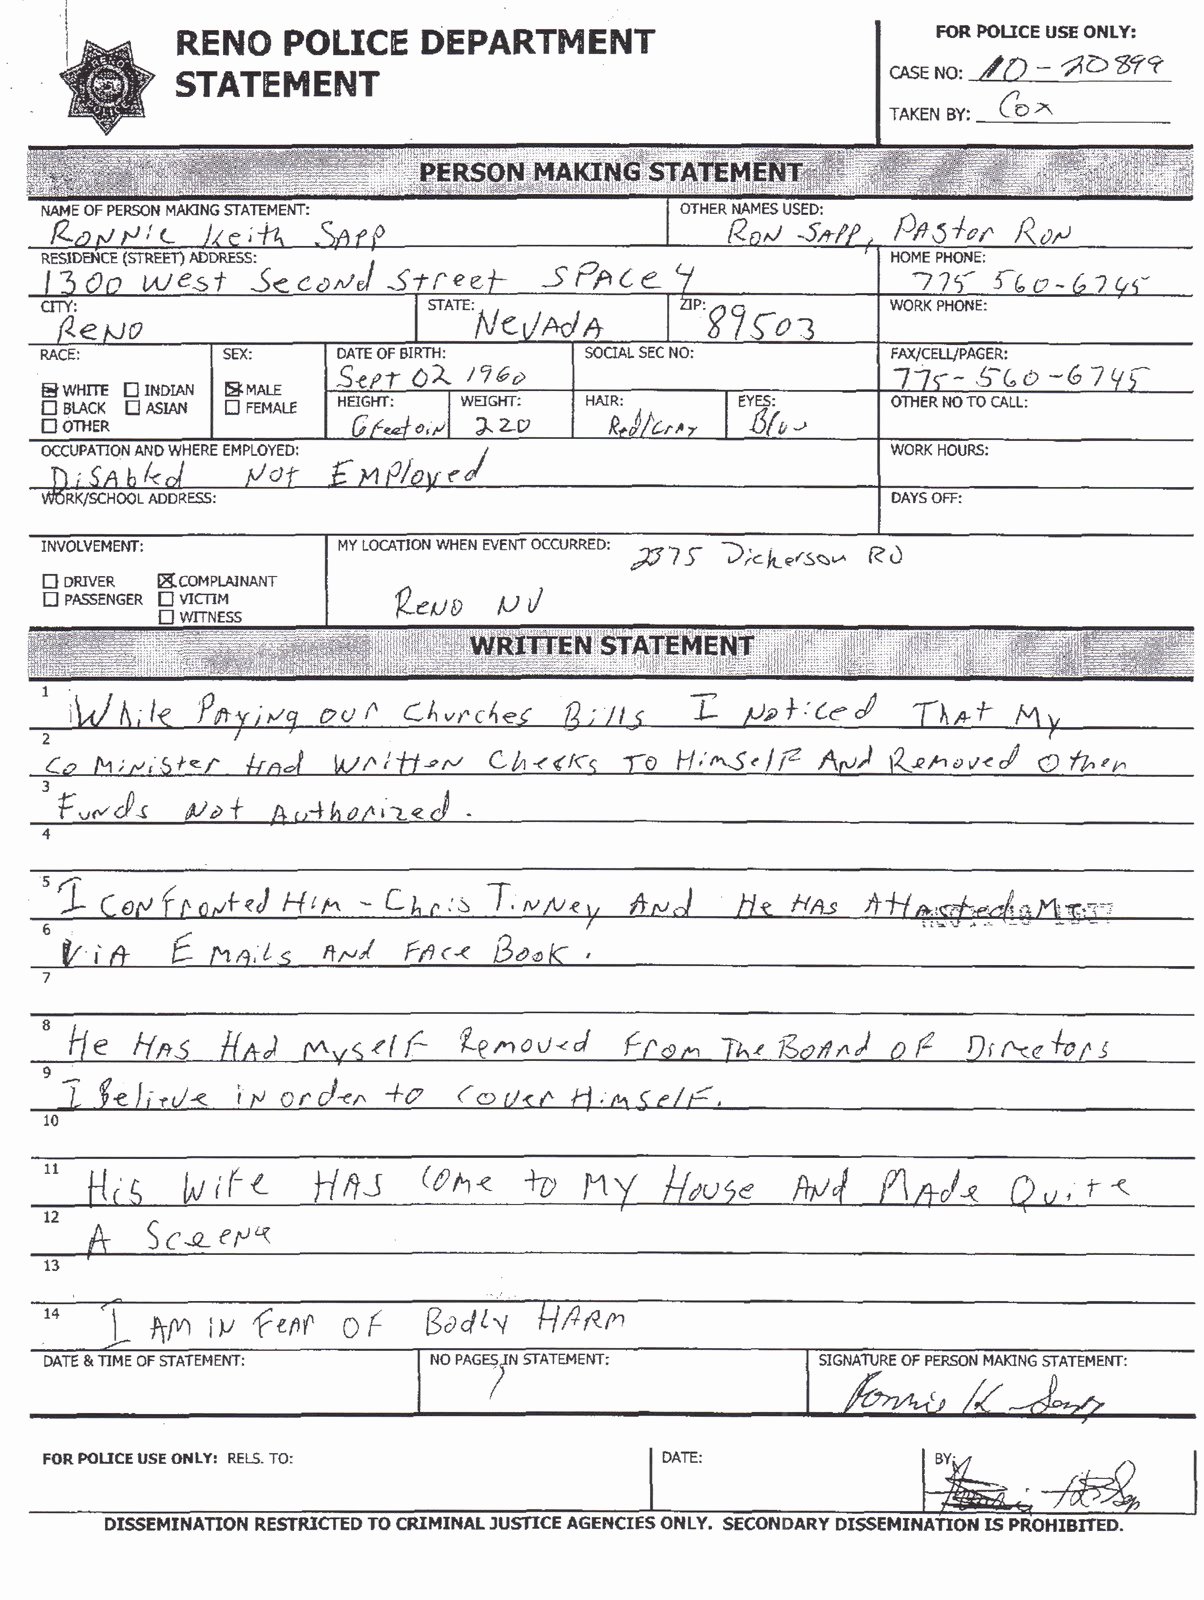 Police Report Samples Best Of Download Free Police Statement Template Coachingfilecloud